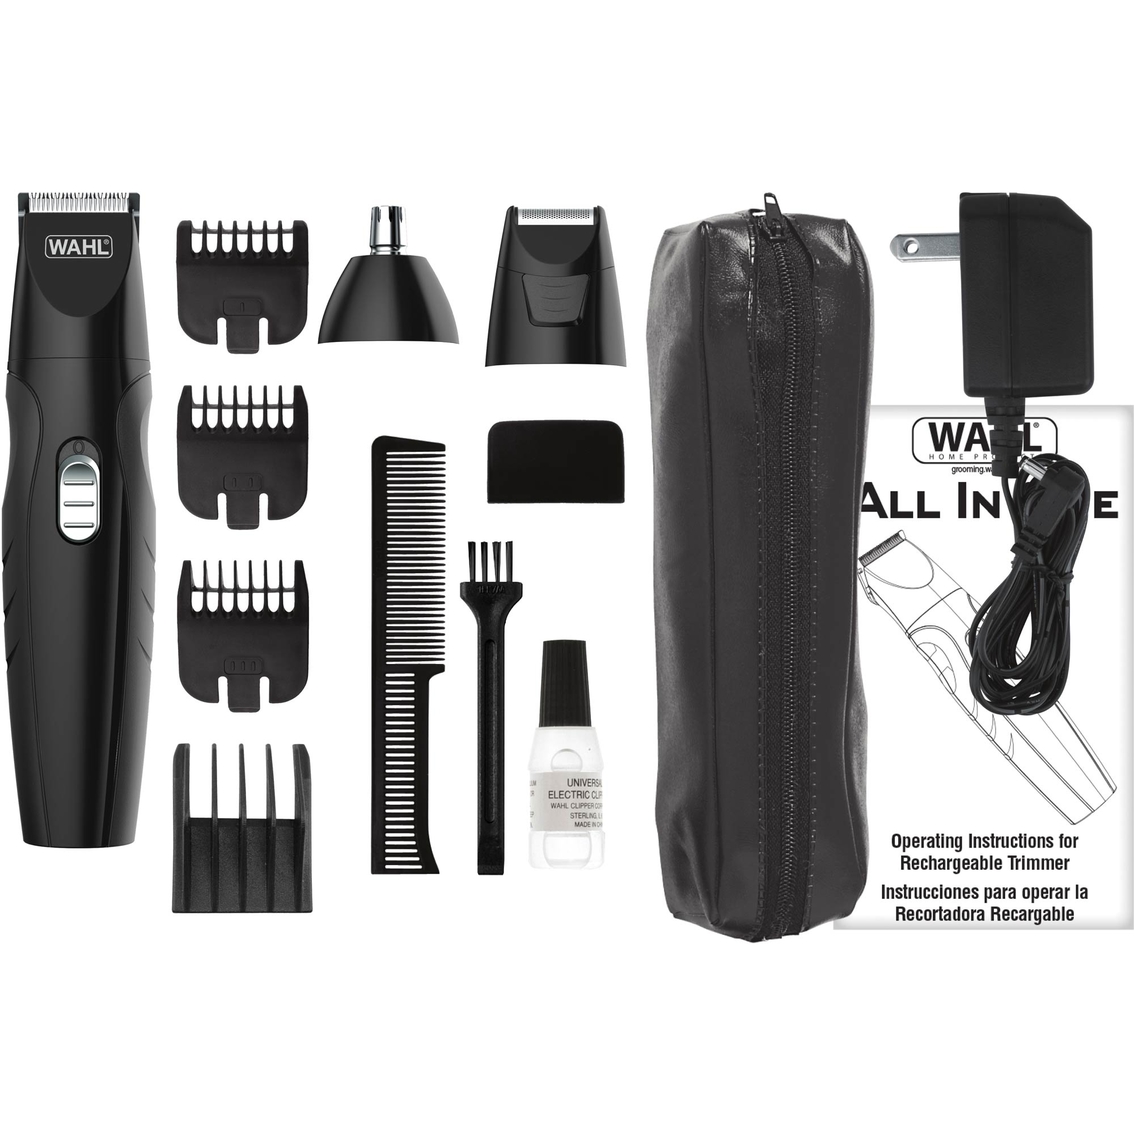 Wahl All in One Rechargeable Trimmer for Beard, Nose, Ear and Face - Image 3 of 4